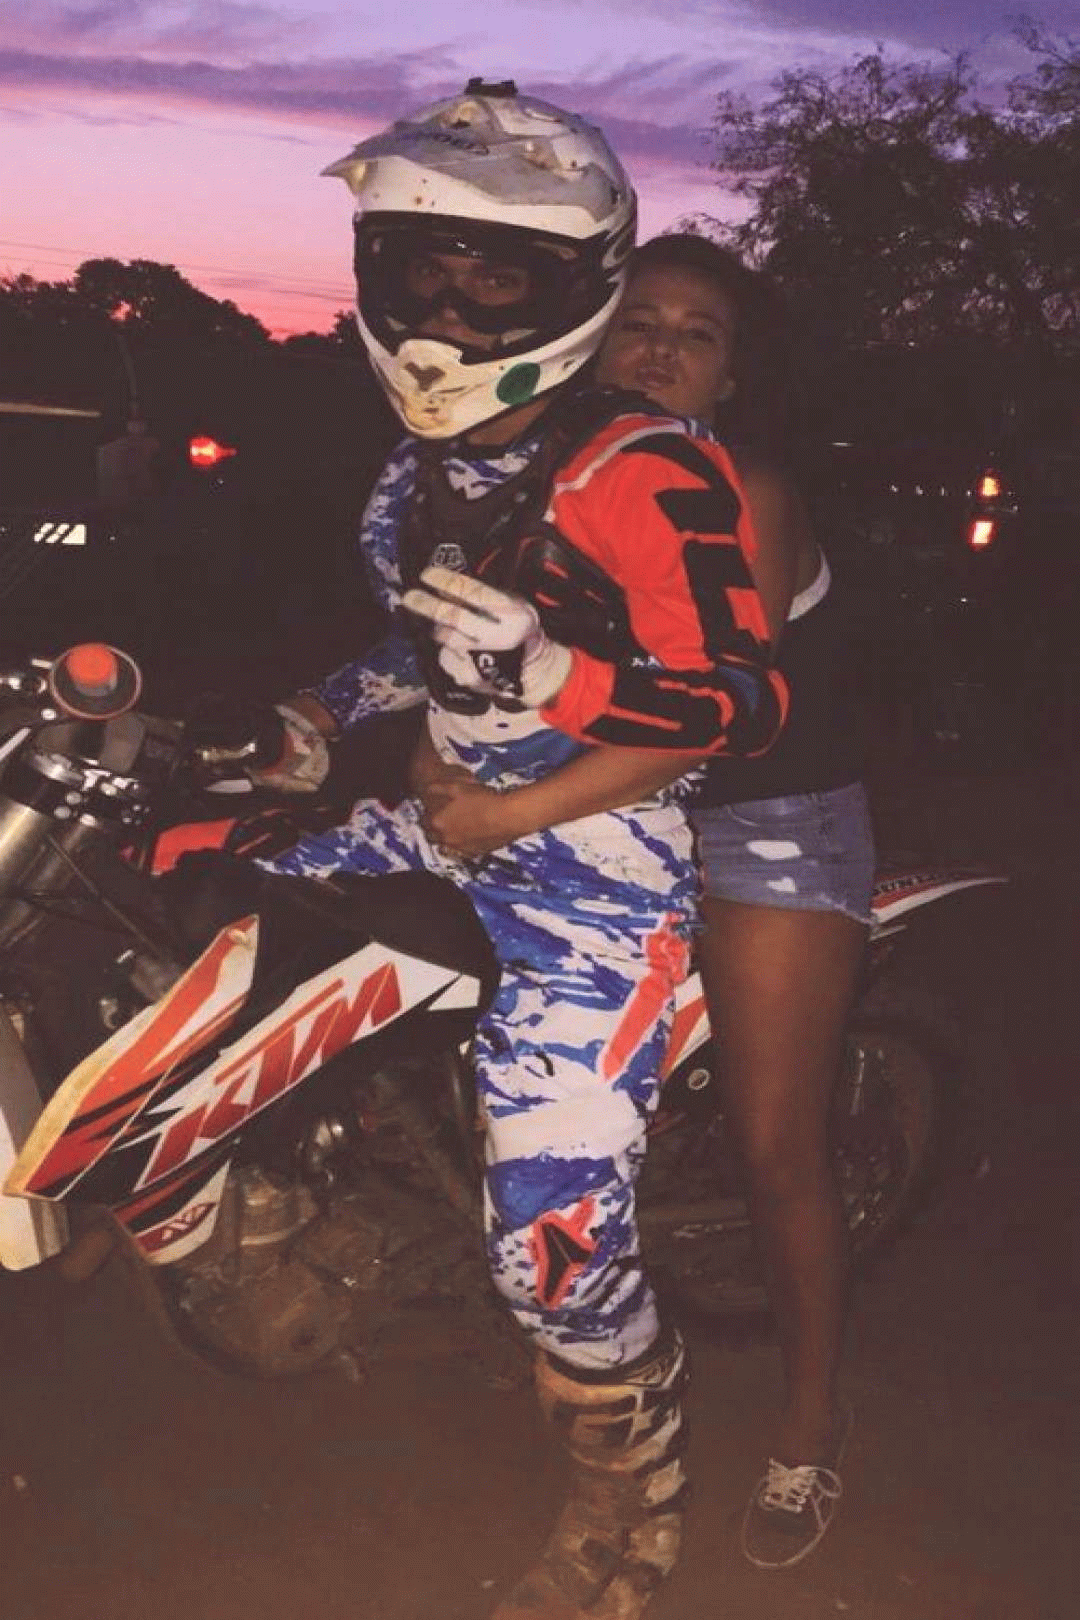 boy hot and motocross bild in 2020 relationship goals small